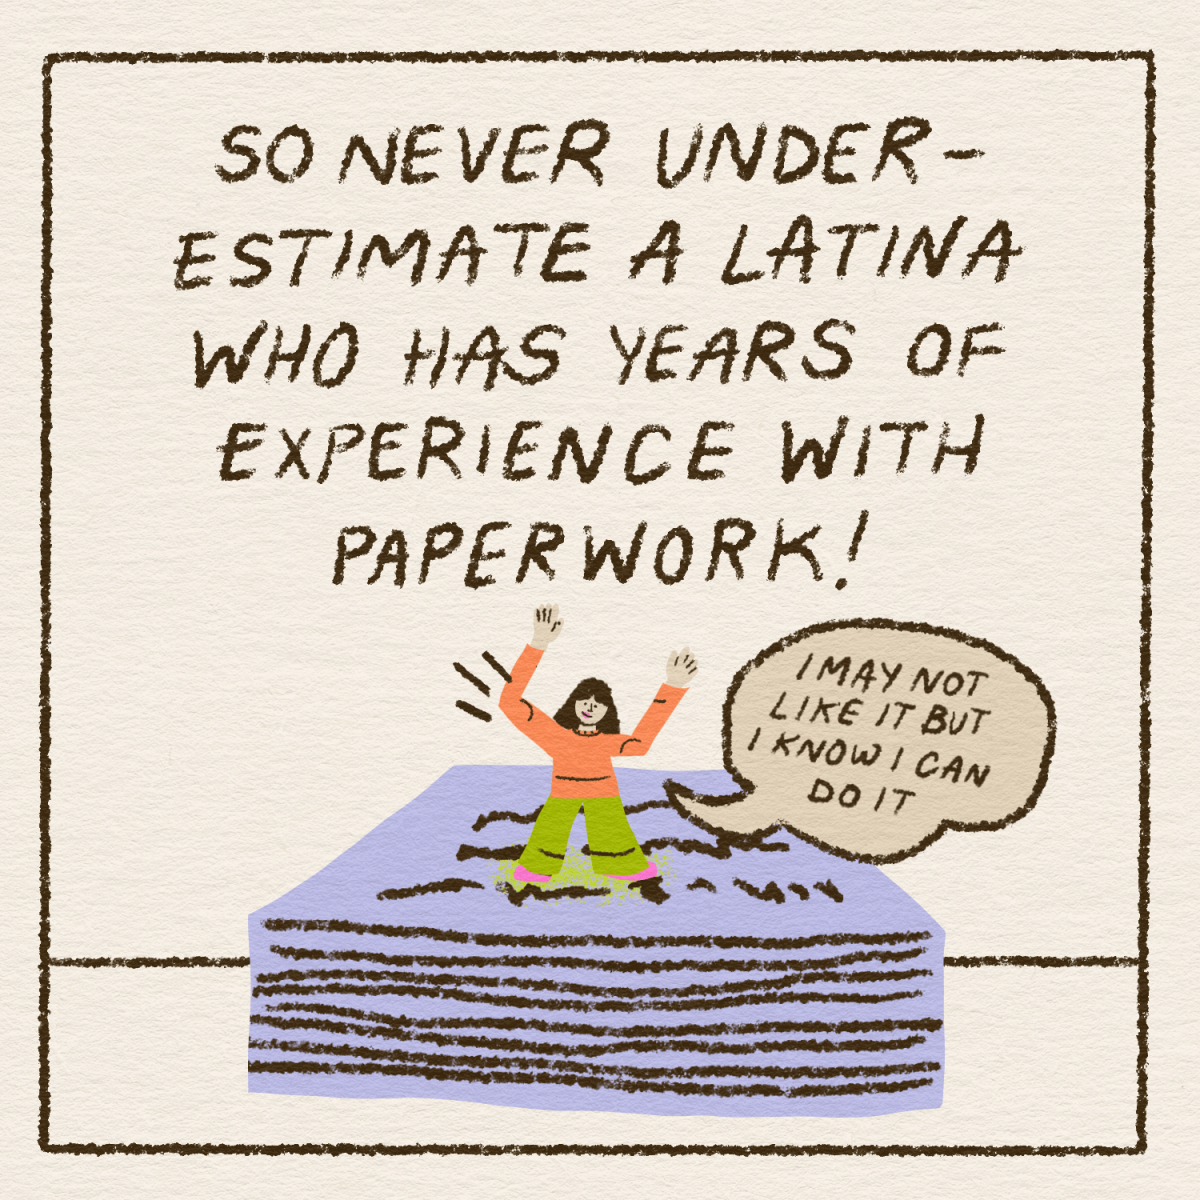 So never underestimate a Latina who has years of experience with paperwork!